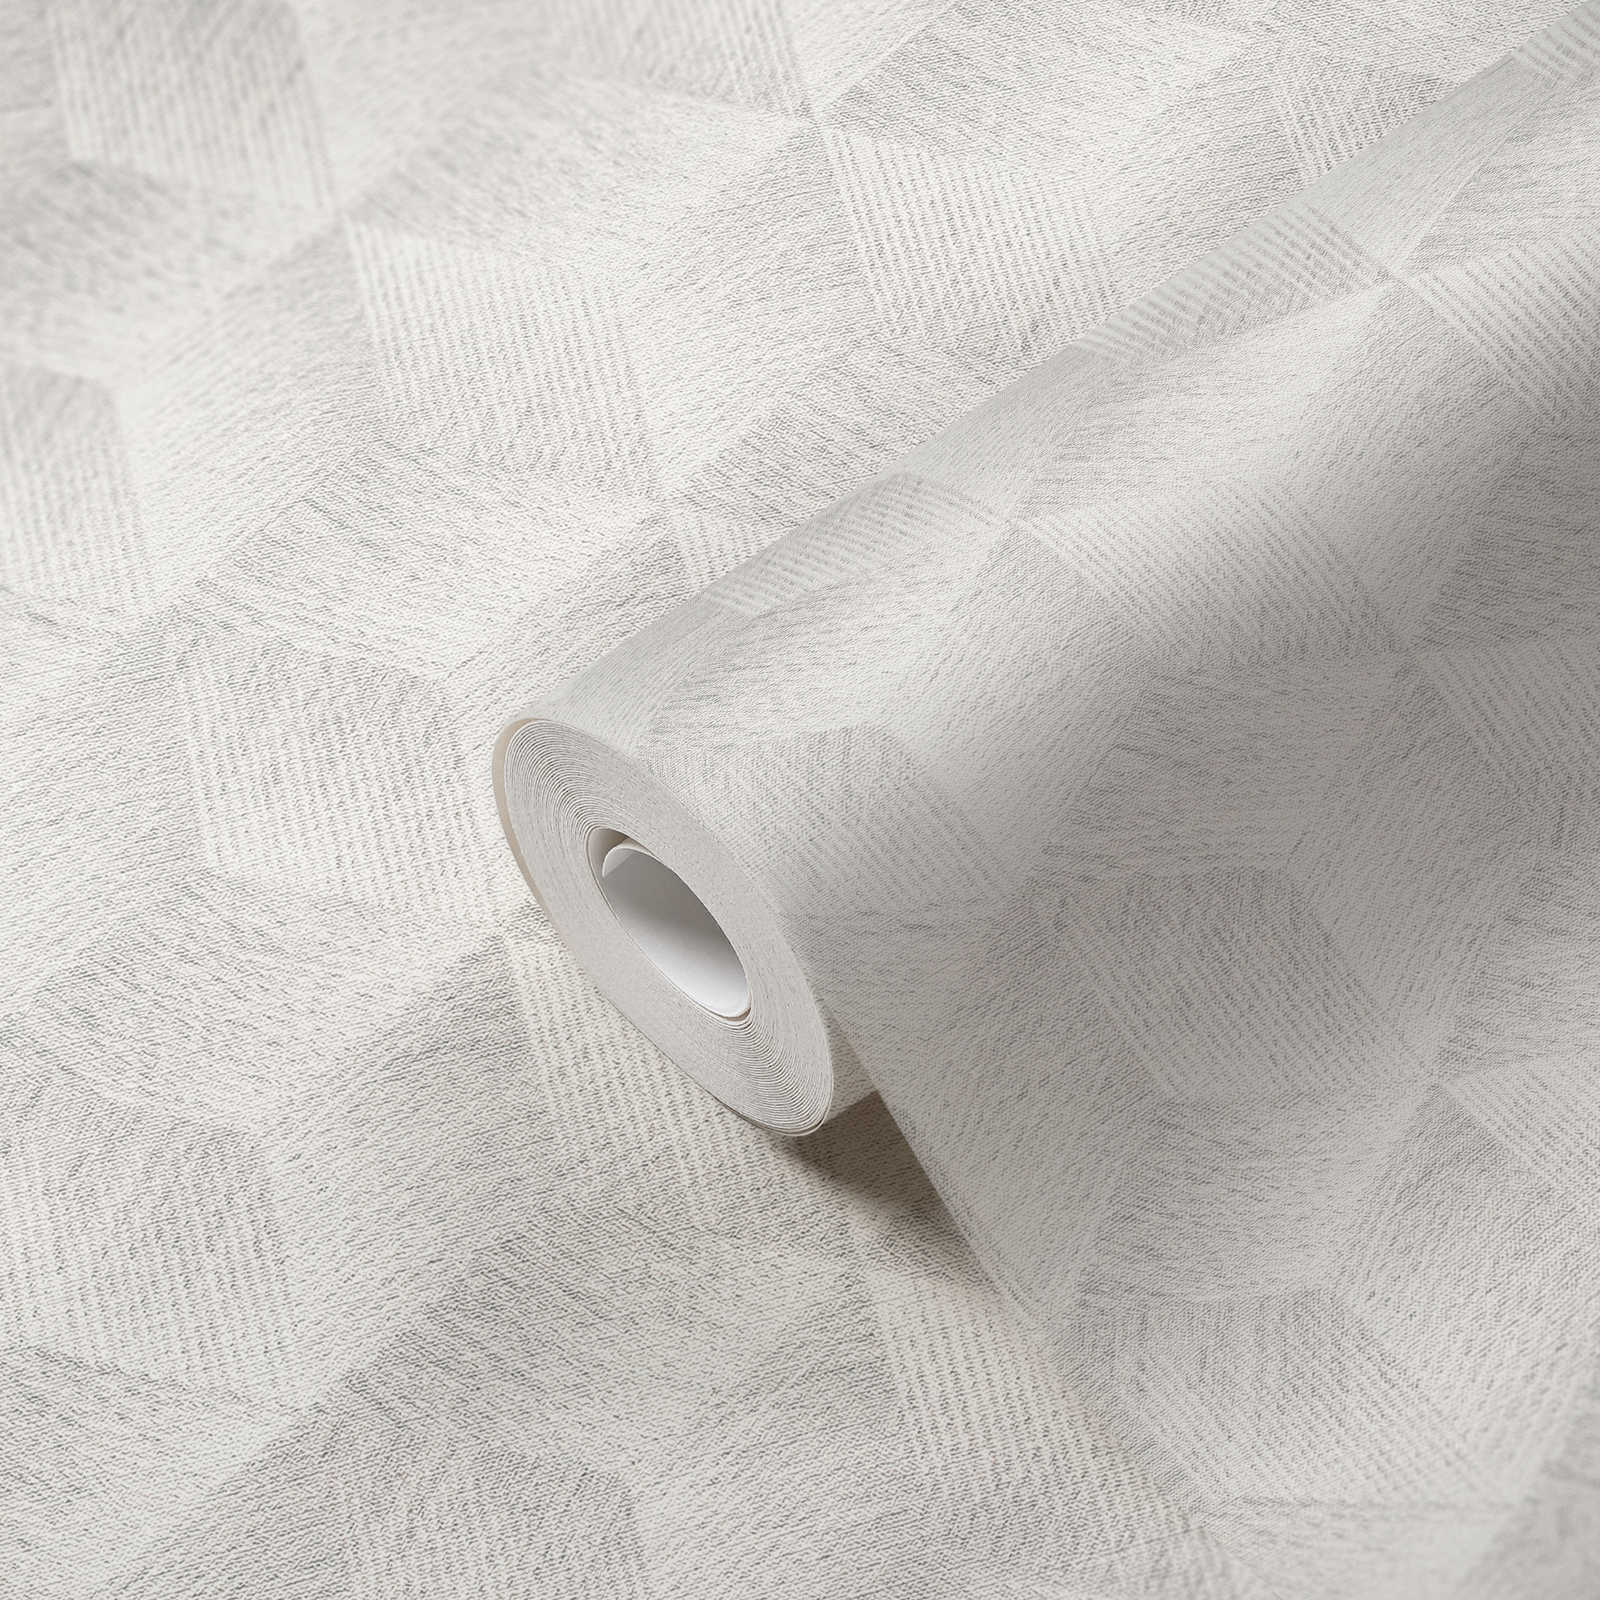             PVC-free 3D optical wallpaper with square pattern & gloss effect - Grey, White
        